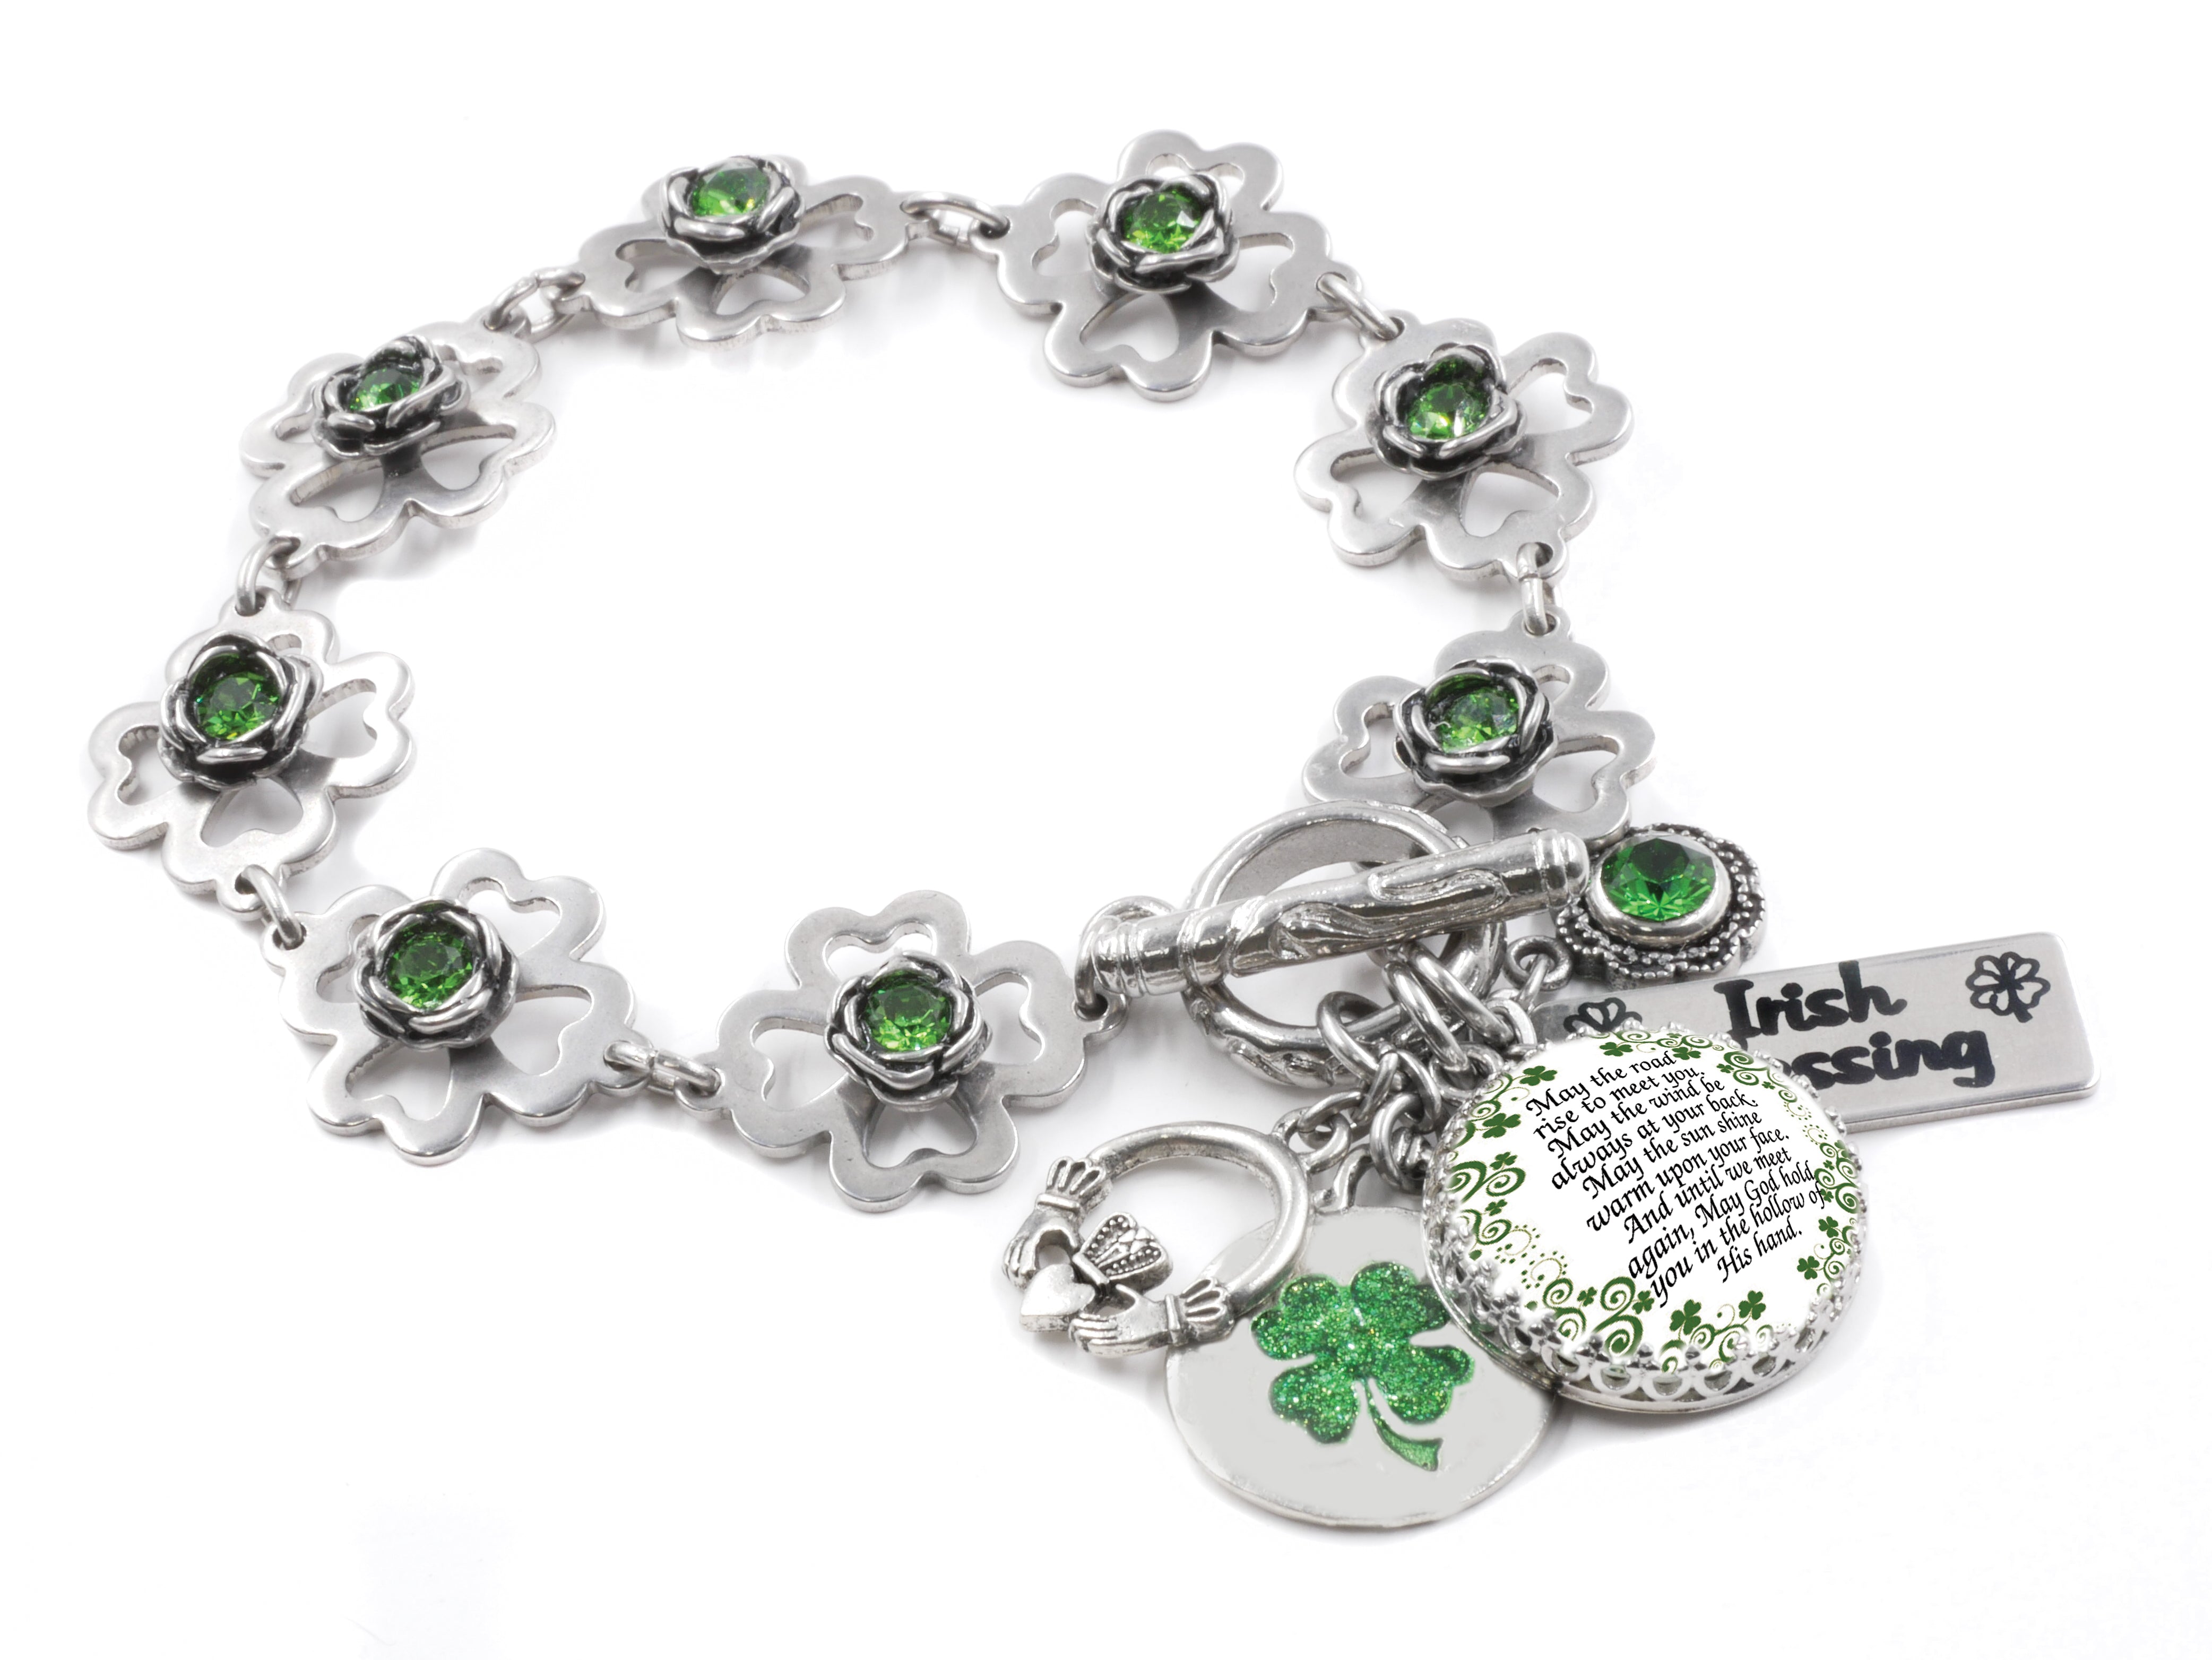 St Patricks Day earrings with shamrock charm – One Glance~Jewelry